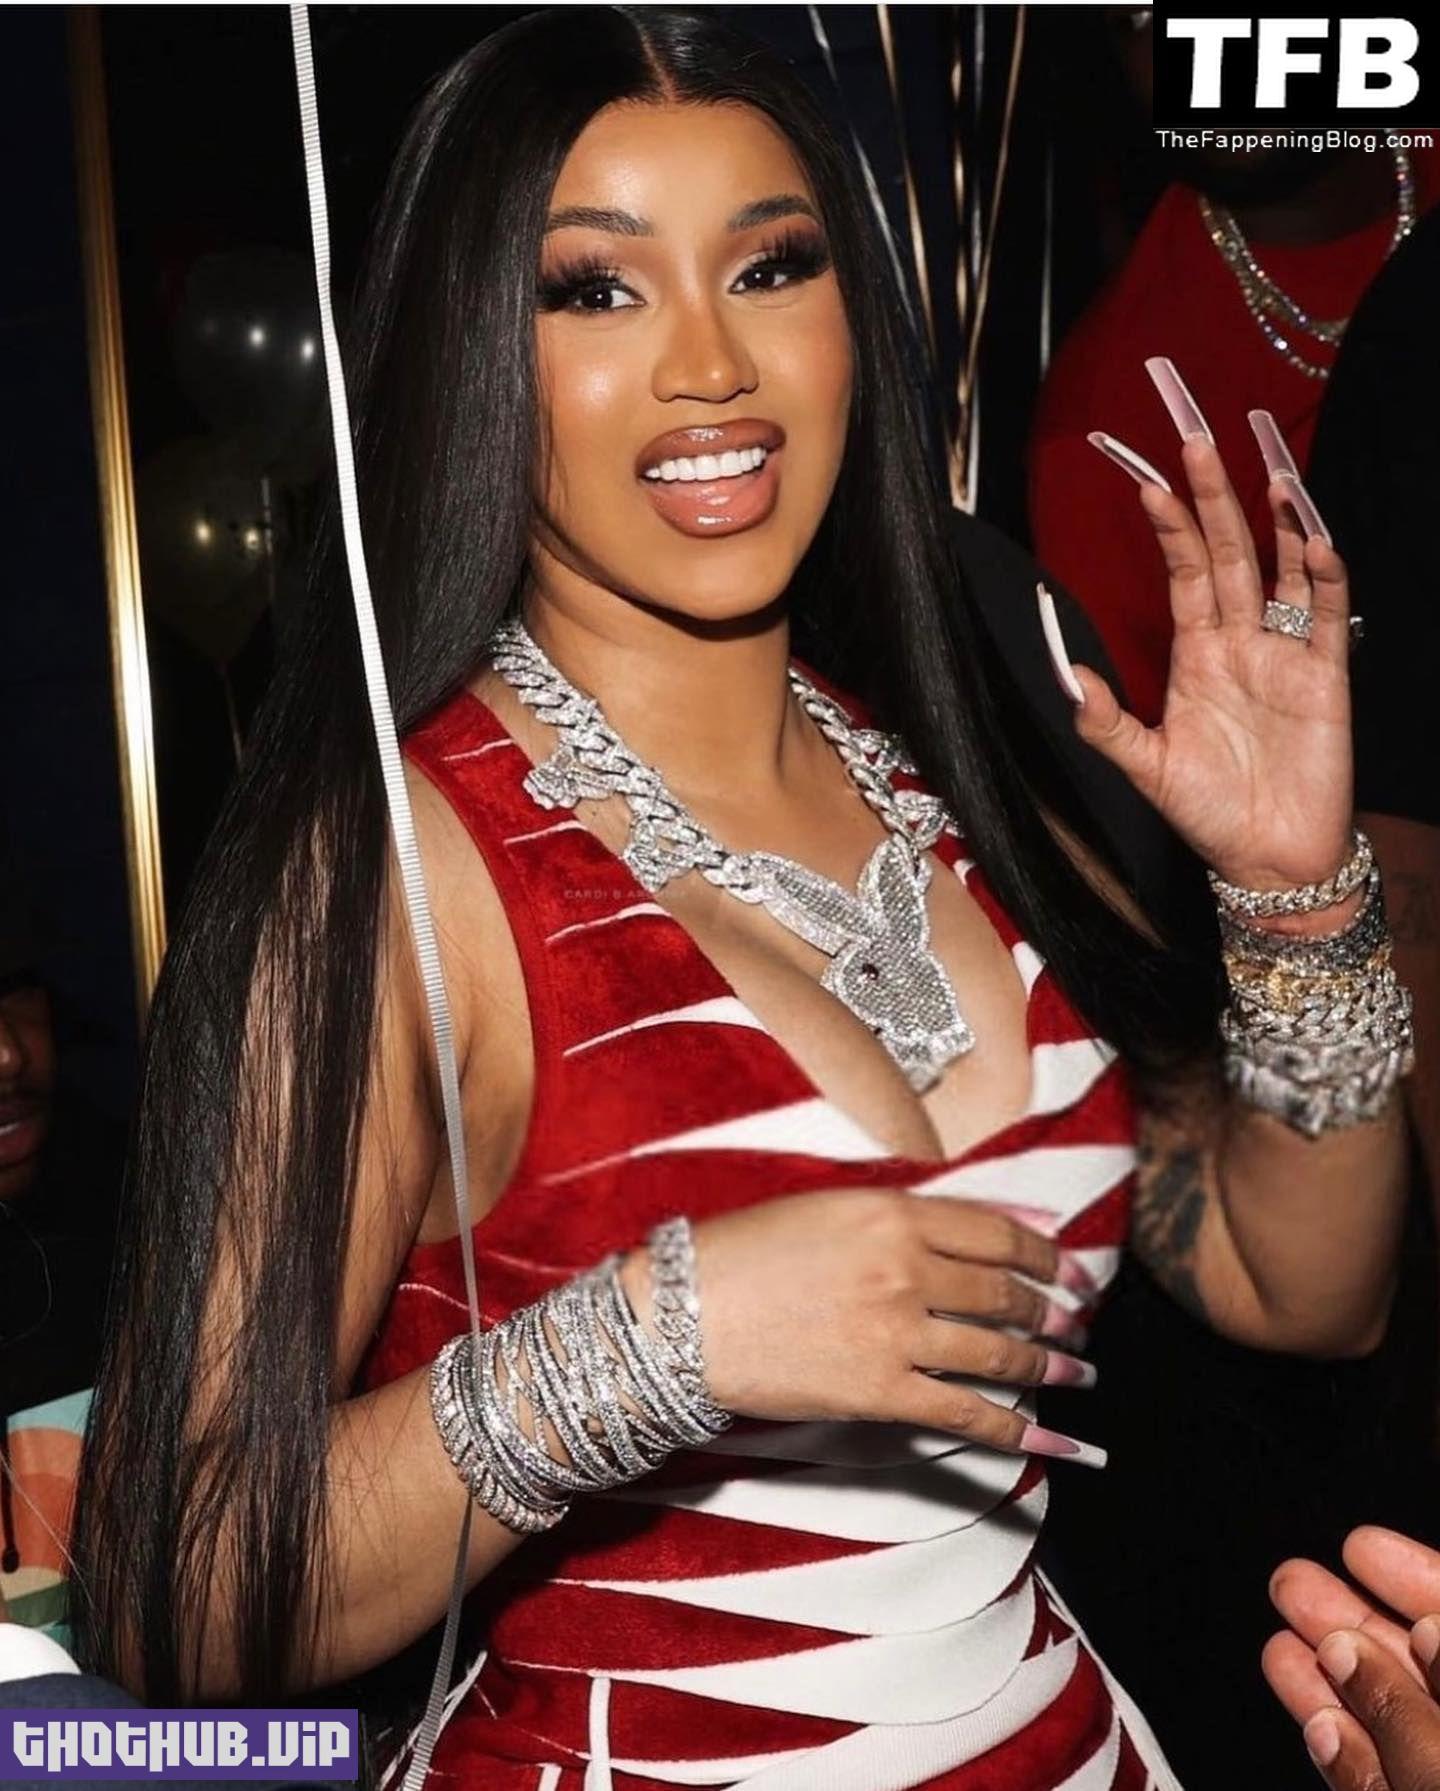 Cardi B Sexy The Fappening Blog 1